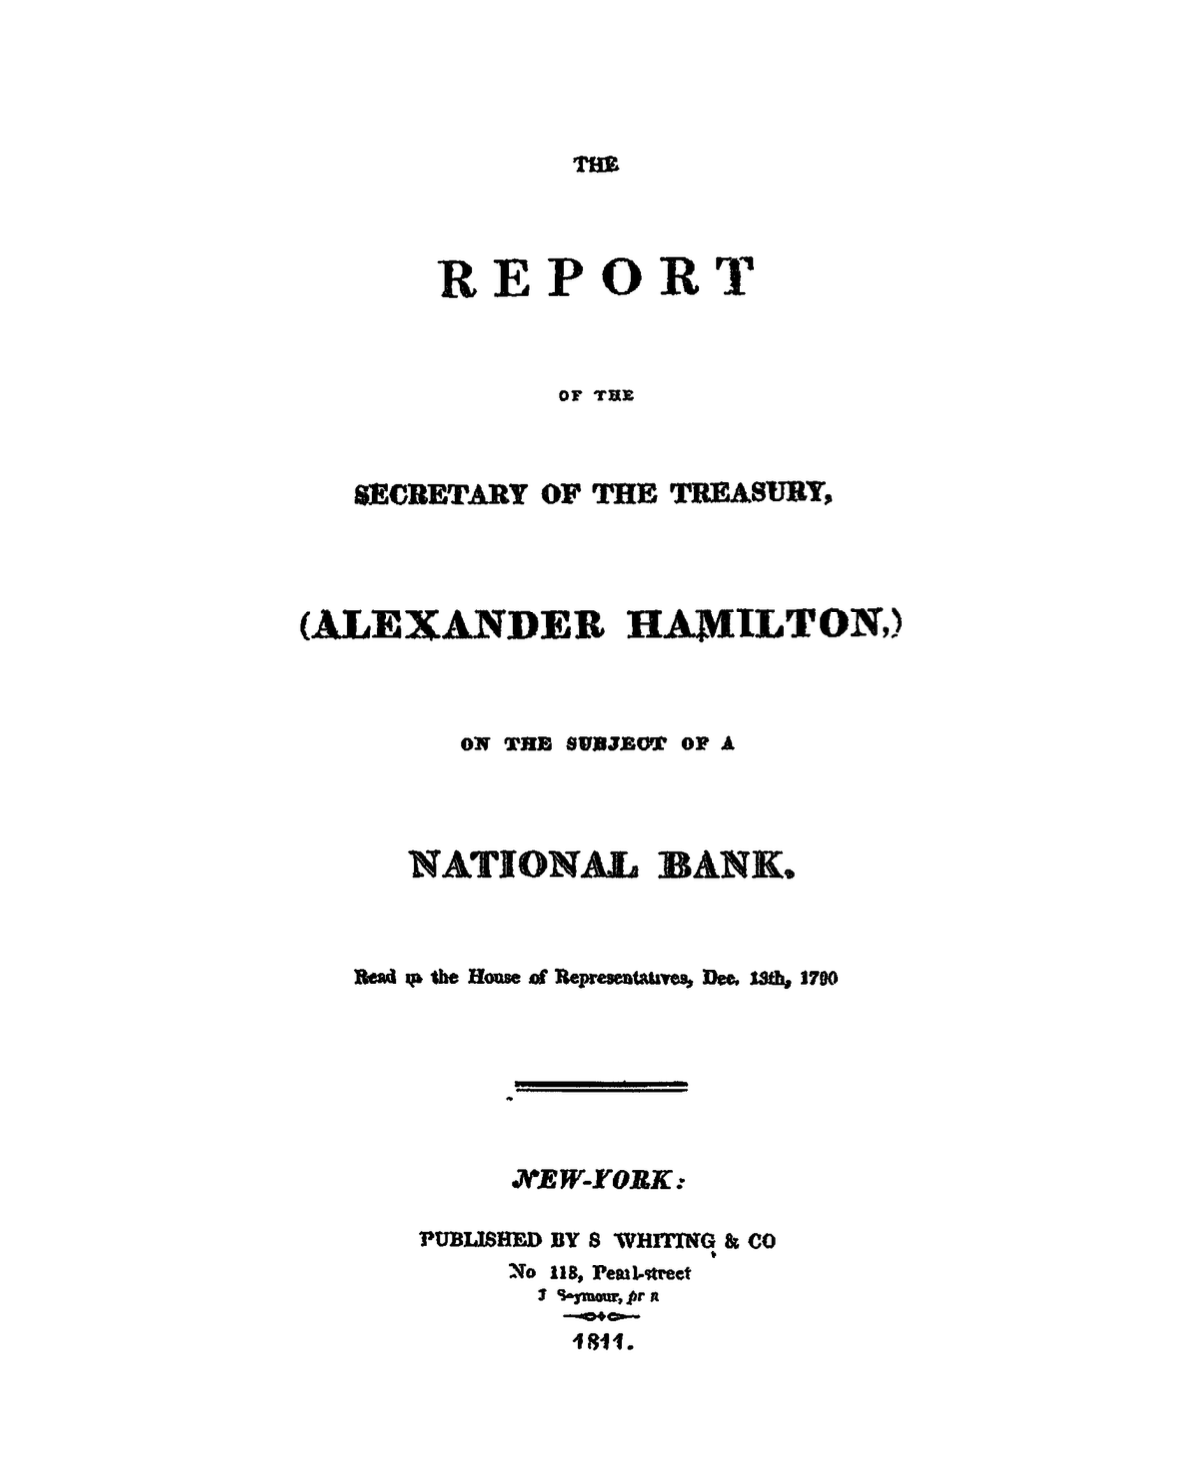 <a href="https://fraser.stlouisfed.org/title/report-secretary-treasury-alexander-hamilton-subject-a-national-bank-3677">Report of the Secretary of the Treasury, Alexander Hamilton, on the Subject of a National Bank : Read in the House of Representatives Dec. 13th, 1790 | Title | FRASER</a>